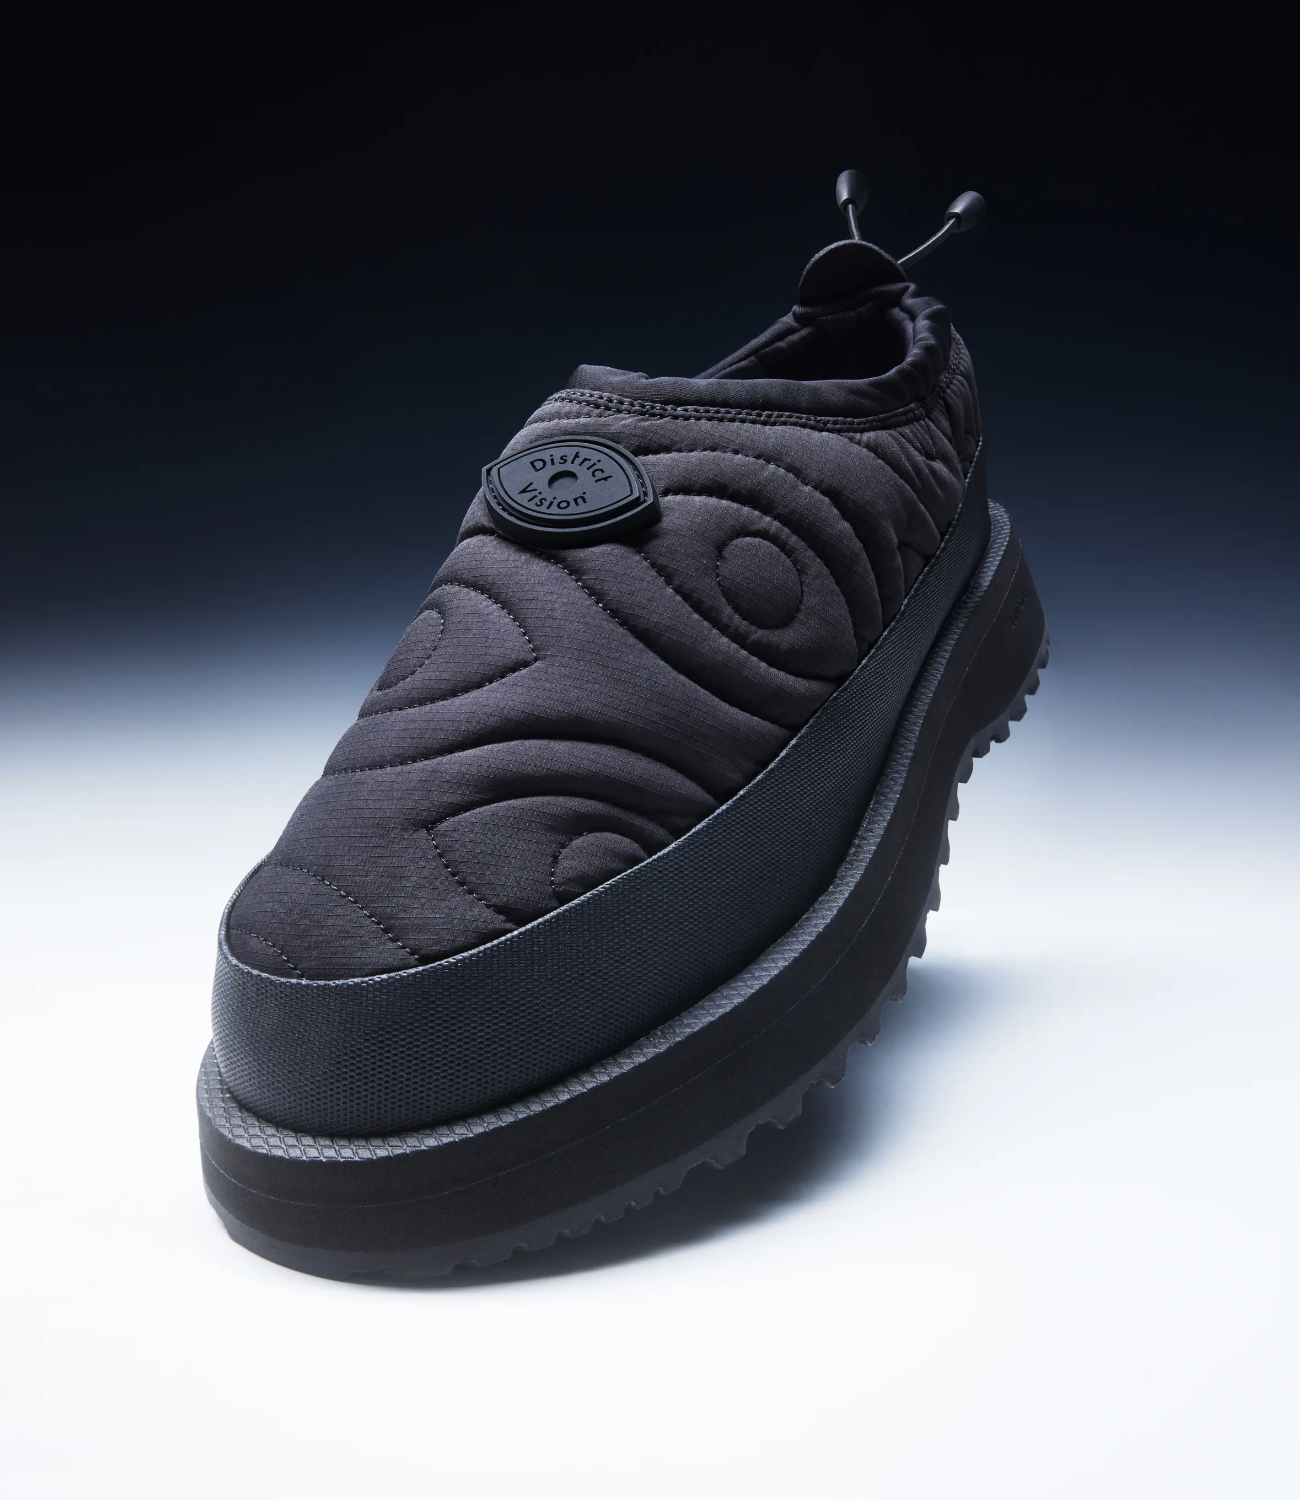 District Vision & Suicoke have linked up for a Fall/Winter 2023 footwear collaboration.